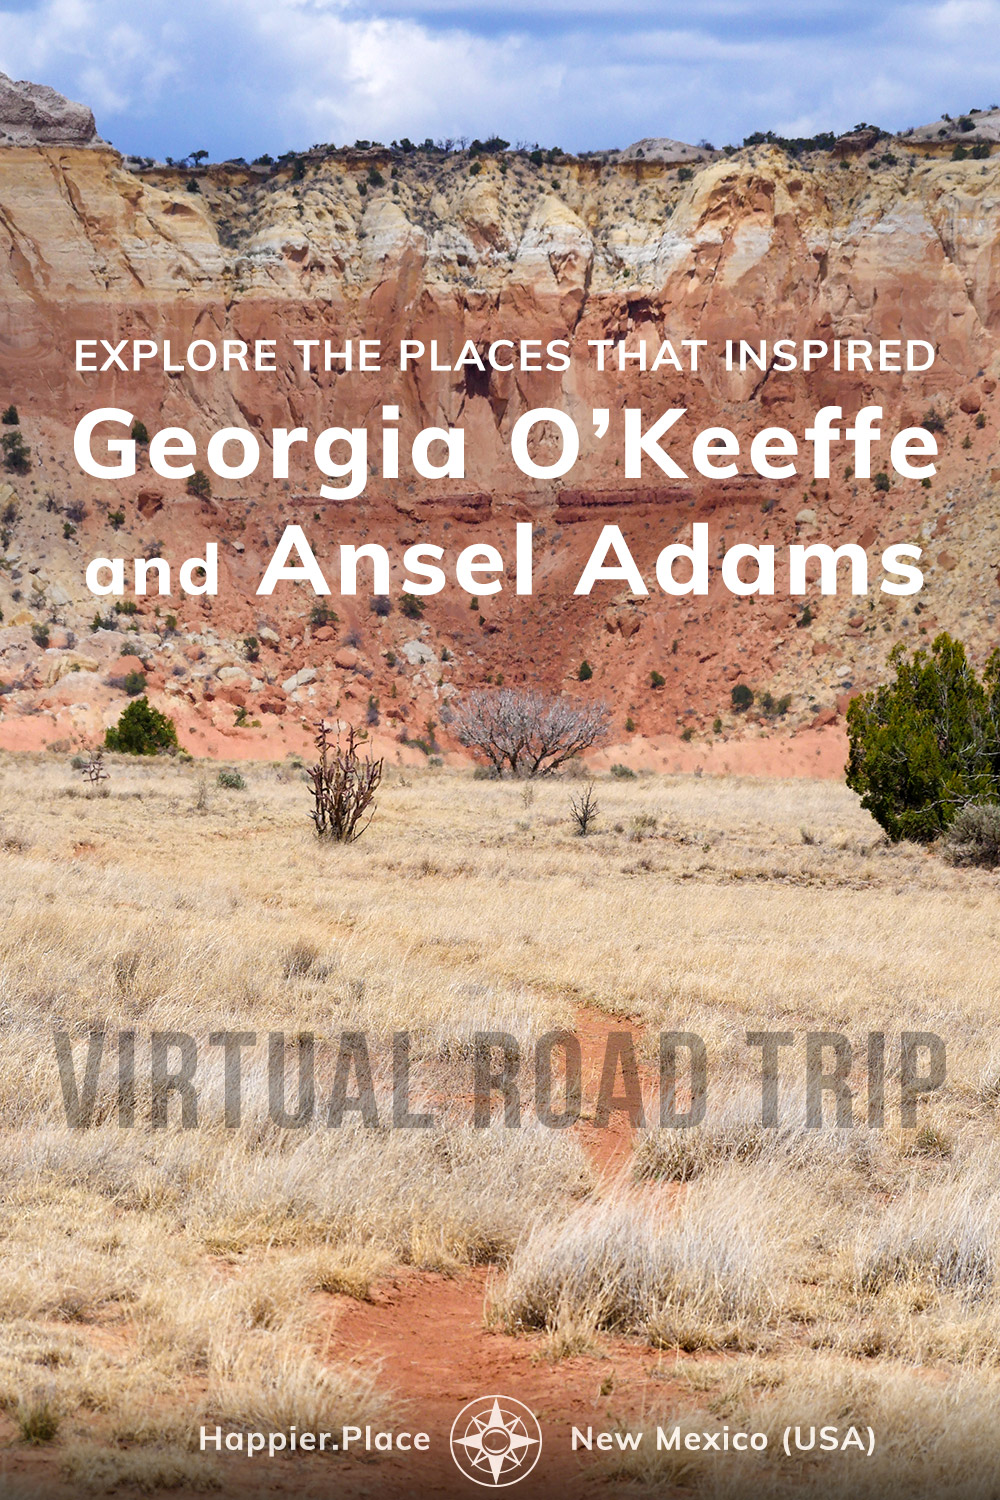 explore the places that inspired georgia o'keeffe and ansel adams, new mexico, virtual road trip, happier place, ghost farm, trail, red rocks